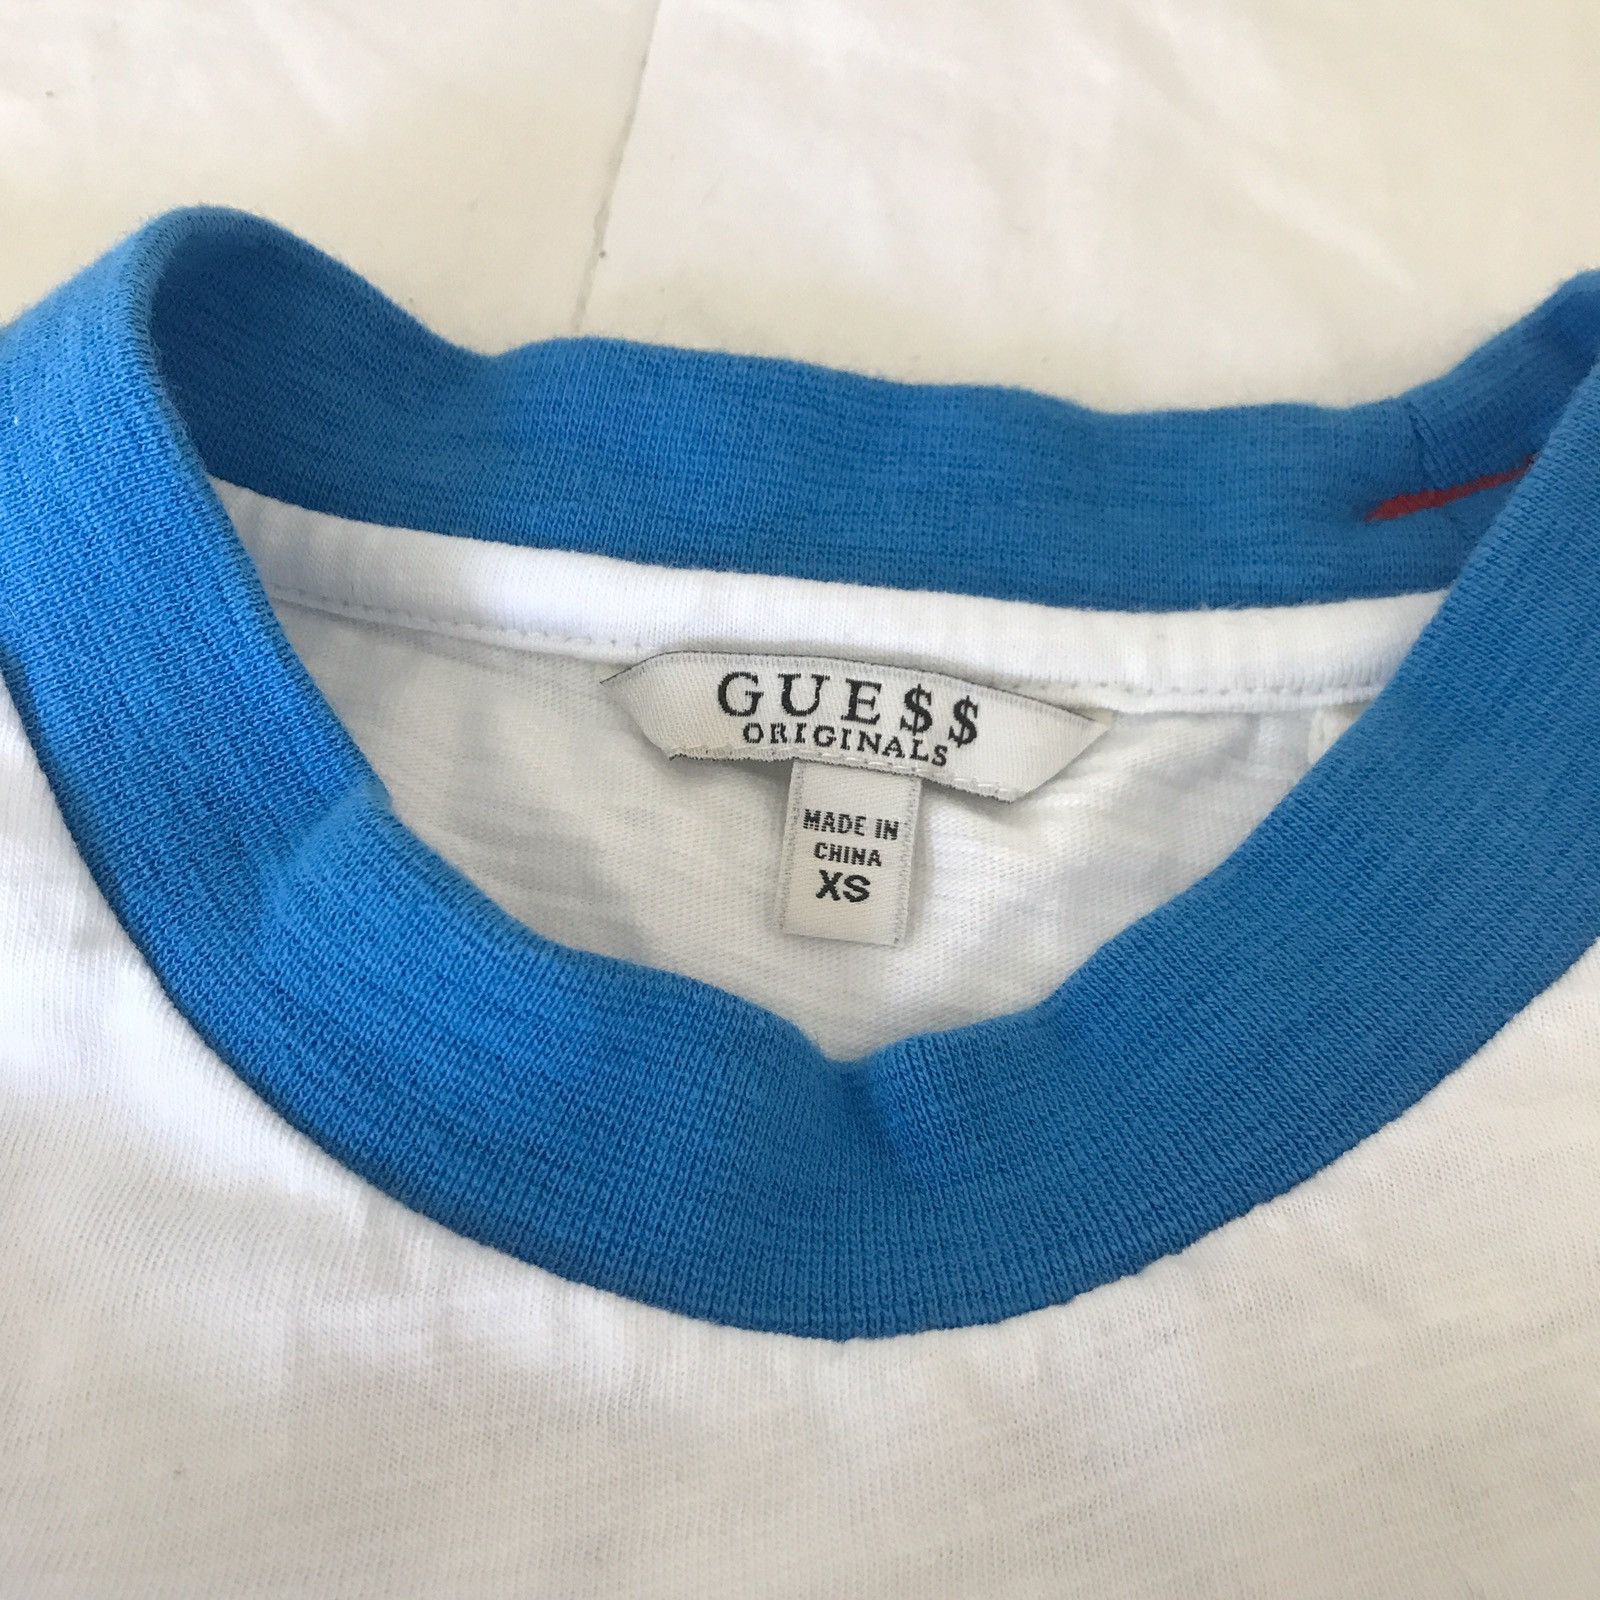 Guess Guess x A$AP Rocky Ringer Tee Size US XS / EU 42 / 0 - 2 Preview